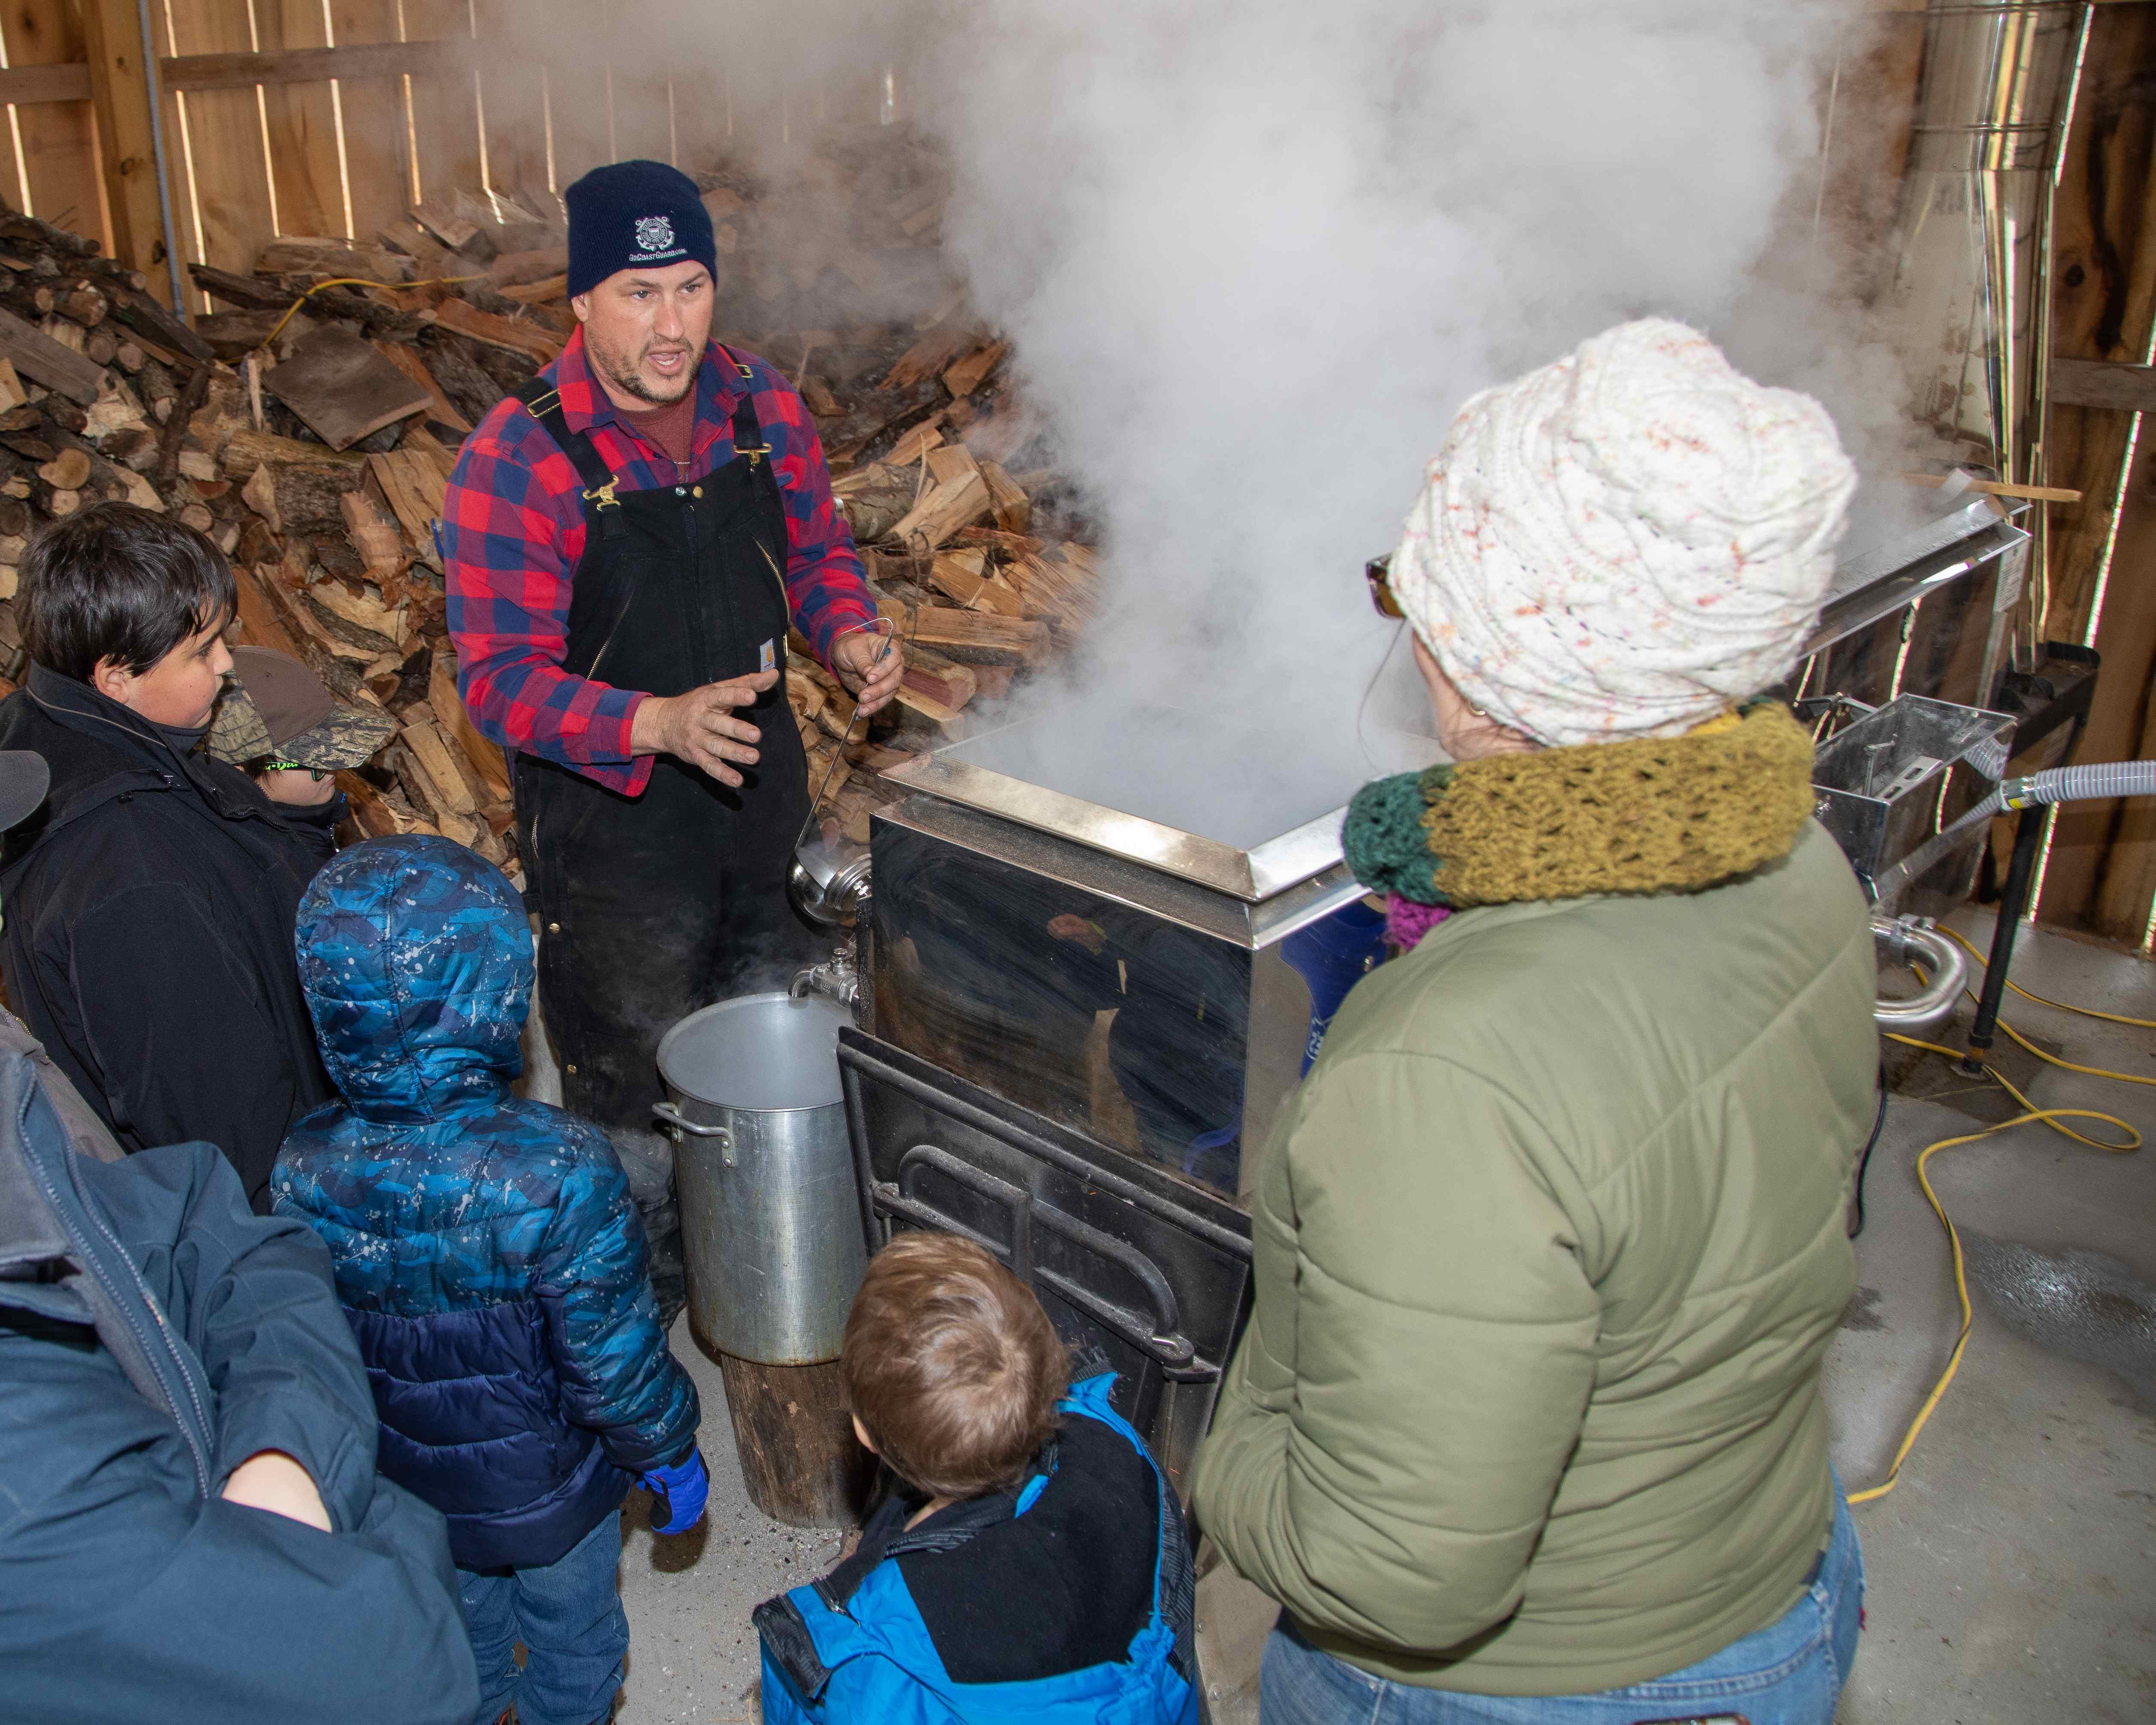 Shawn Hines of Hines East Fork Farm in Edmonton, Ky, shows off his production at the 2021 Kentucky Maple Syrup Day.